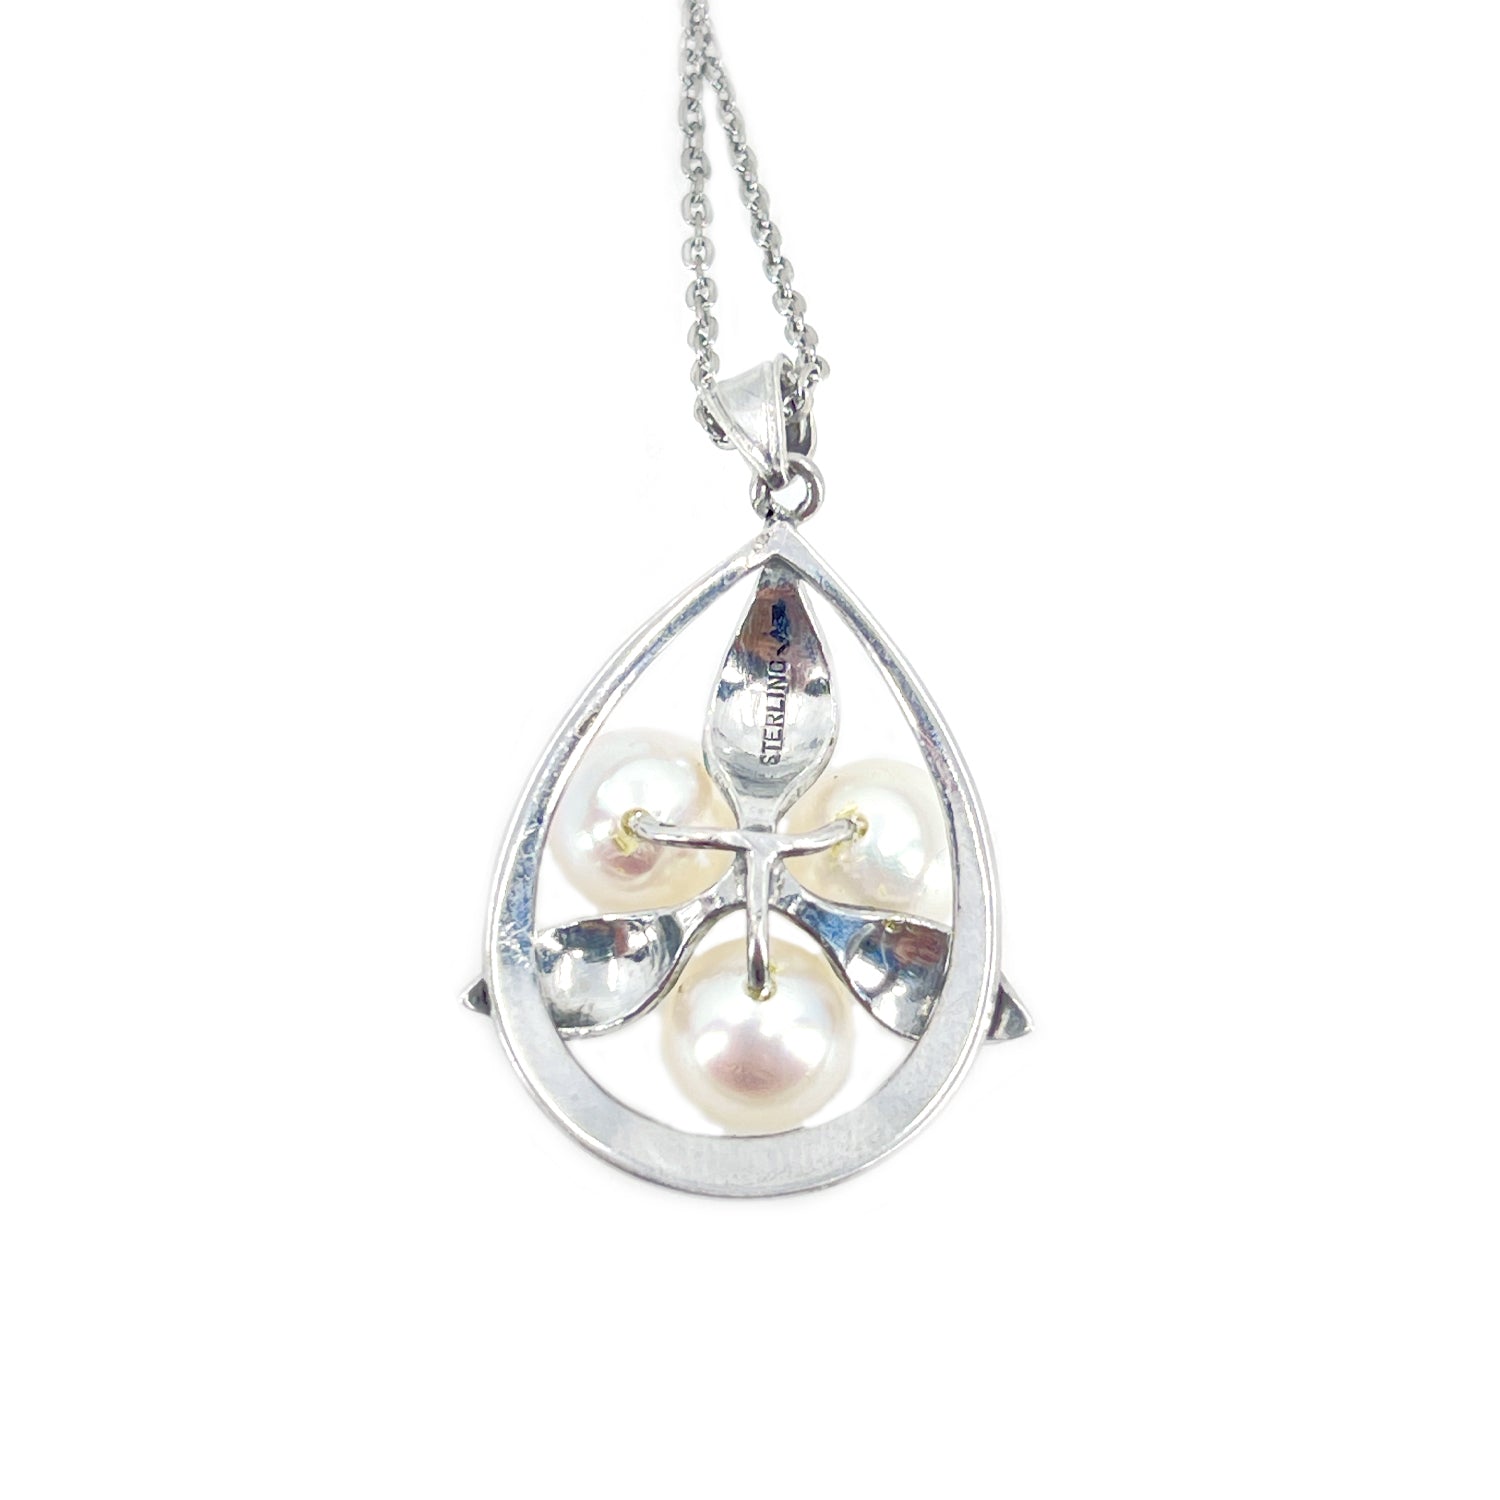 Nouveau Leaf Japanese Cultured Akoya Pearl Pendant Necklace- Sterling Silver 17 Inch